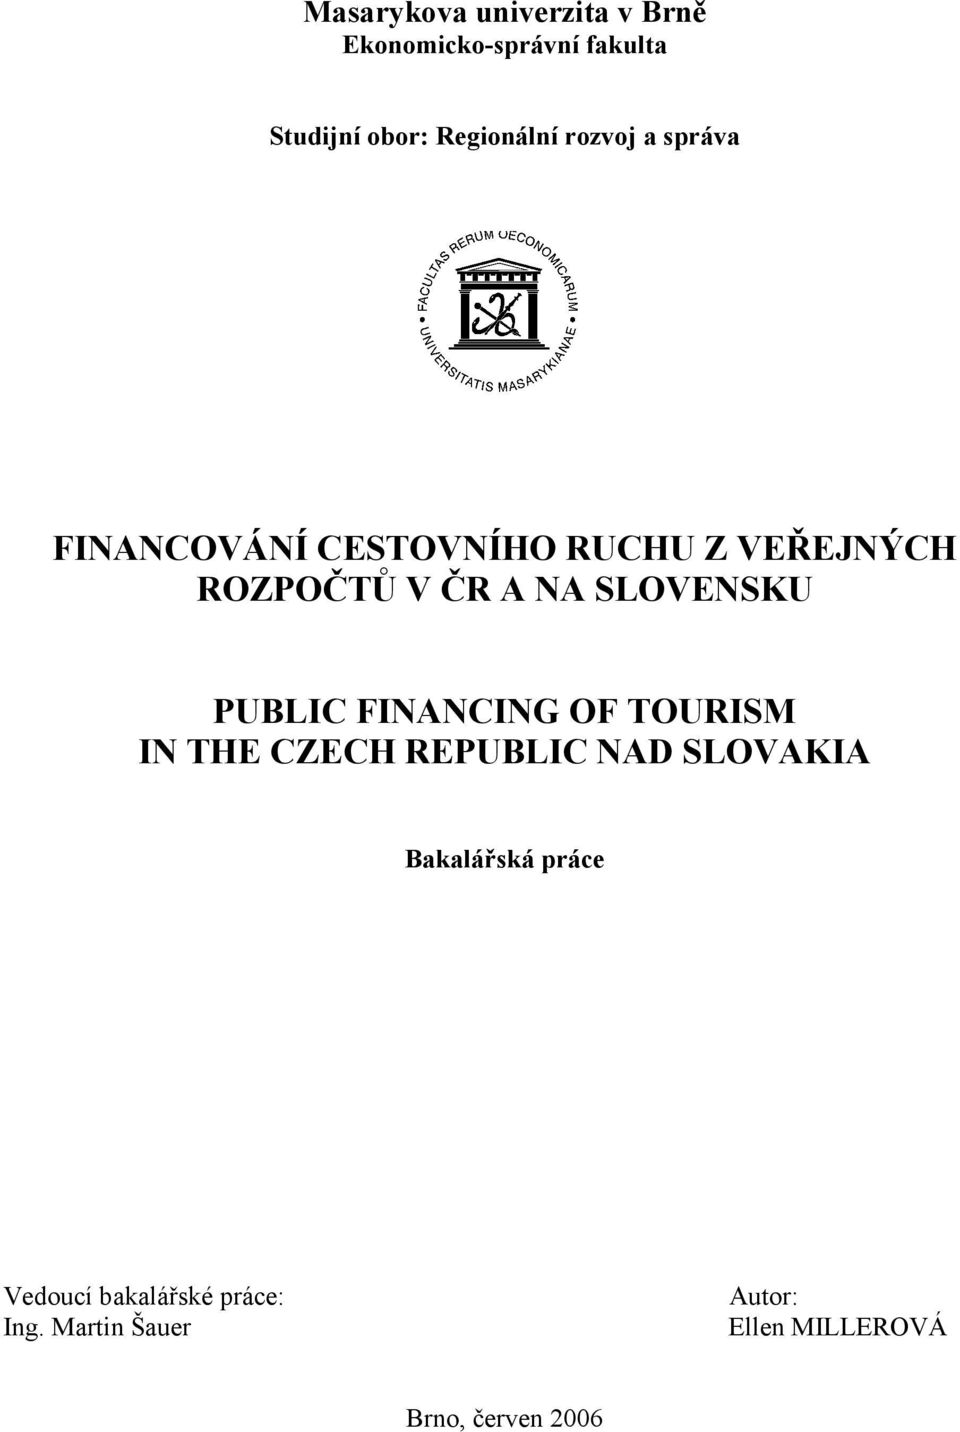 SLOVENSKU PUBLIC FINANCING OF TOURISM IN THE CZECH REPUBLIC NAD SLOVAKIA